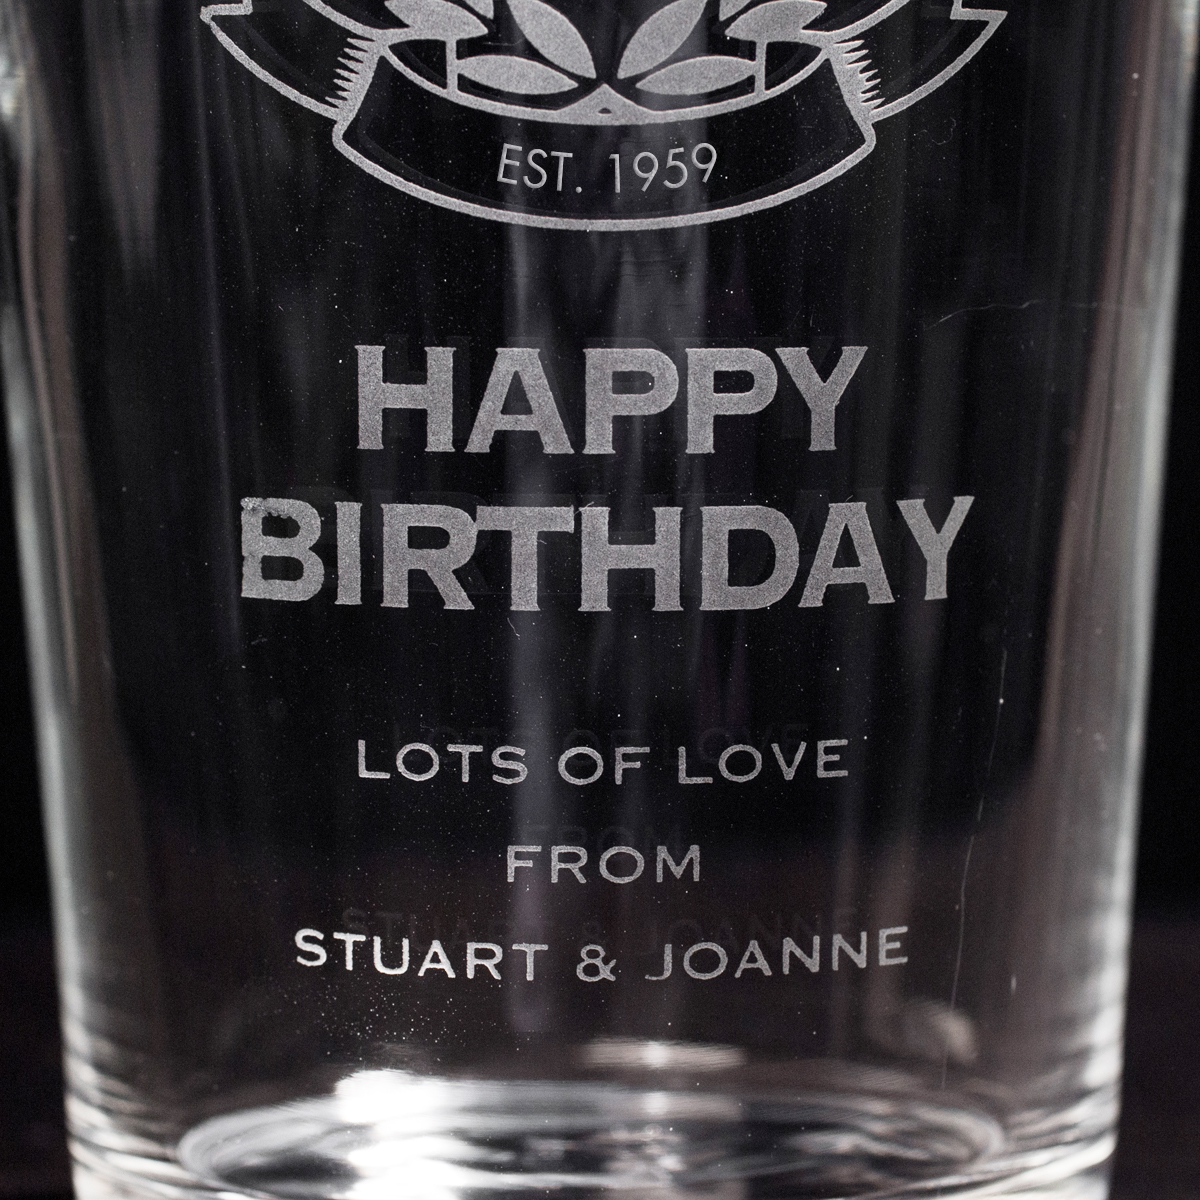 Personalised Pint Glass - 60th Birthday Crest